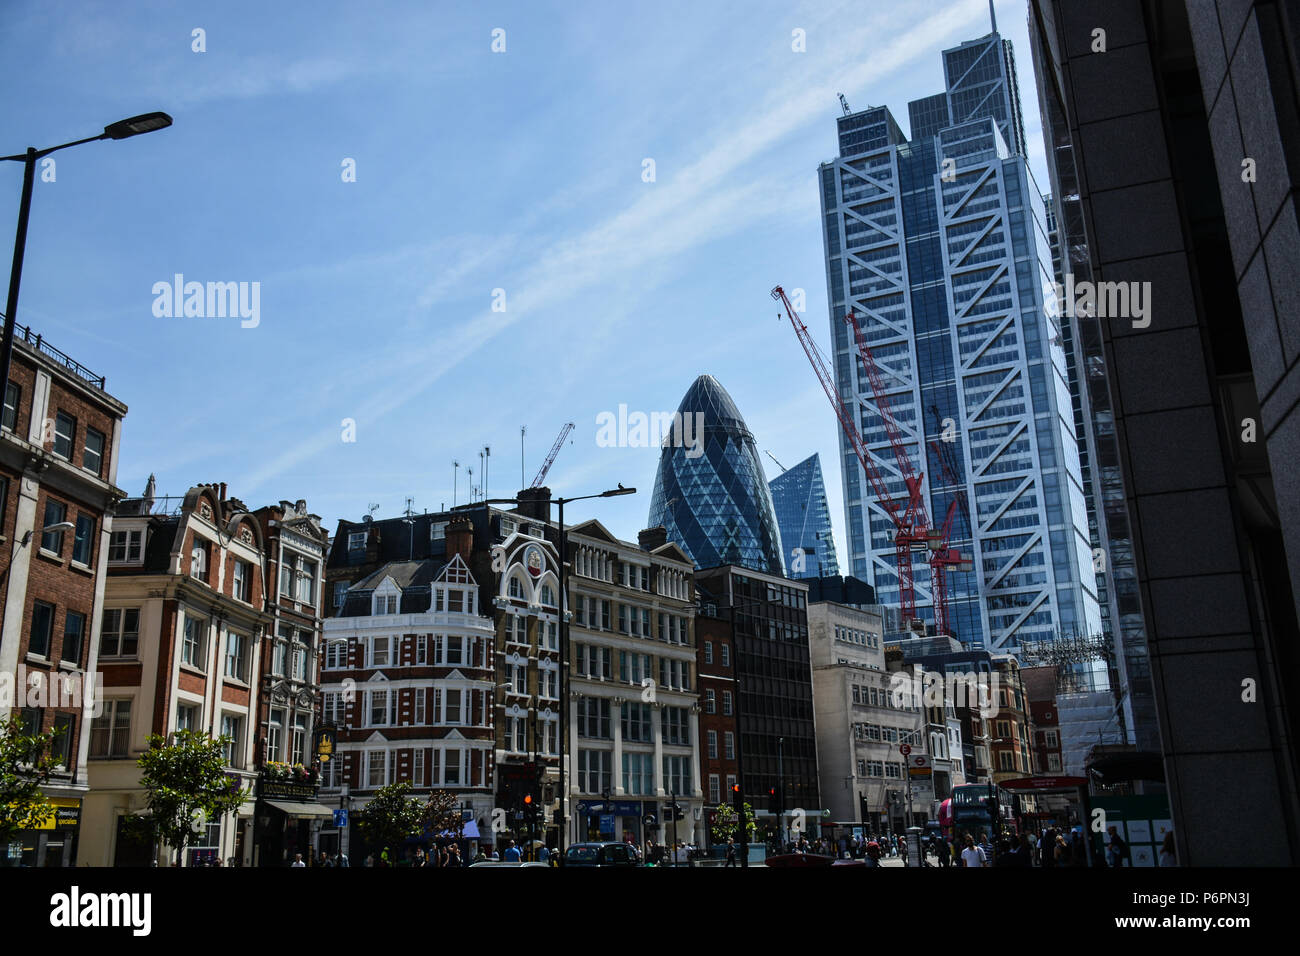 Architecture mixture in London, England. Stock Photo